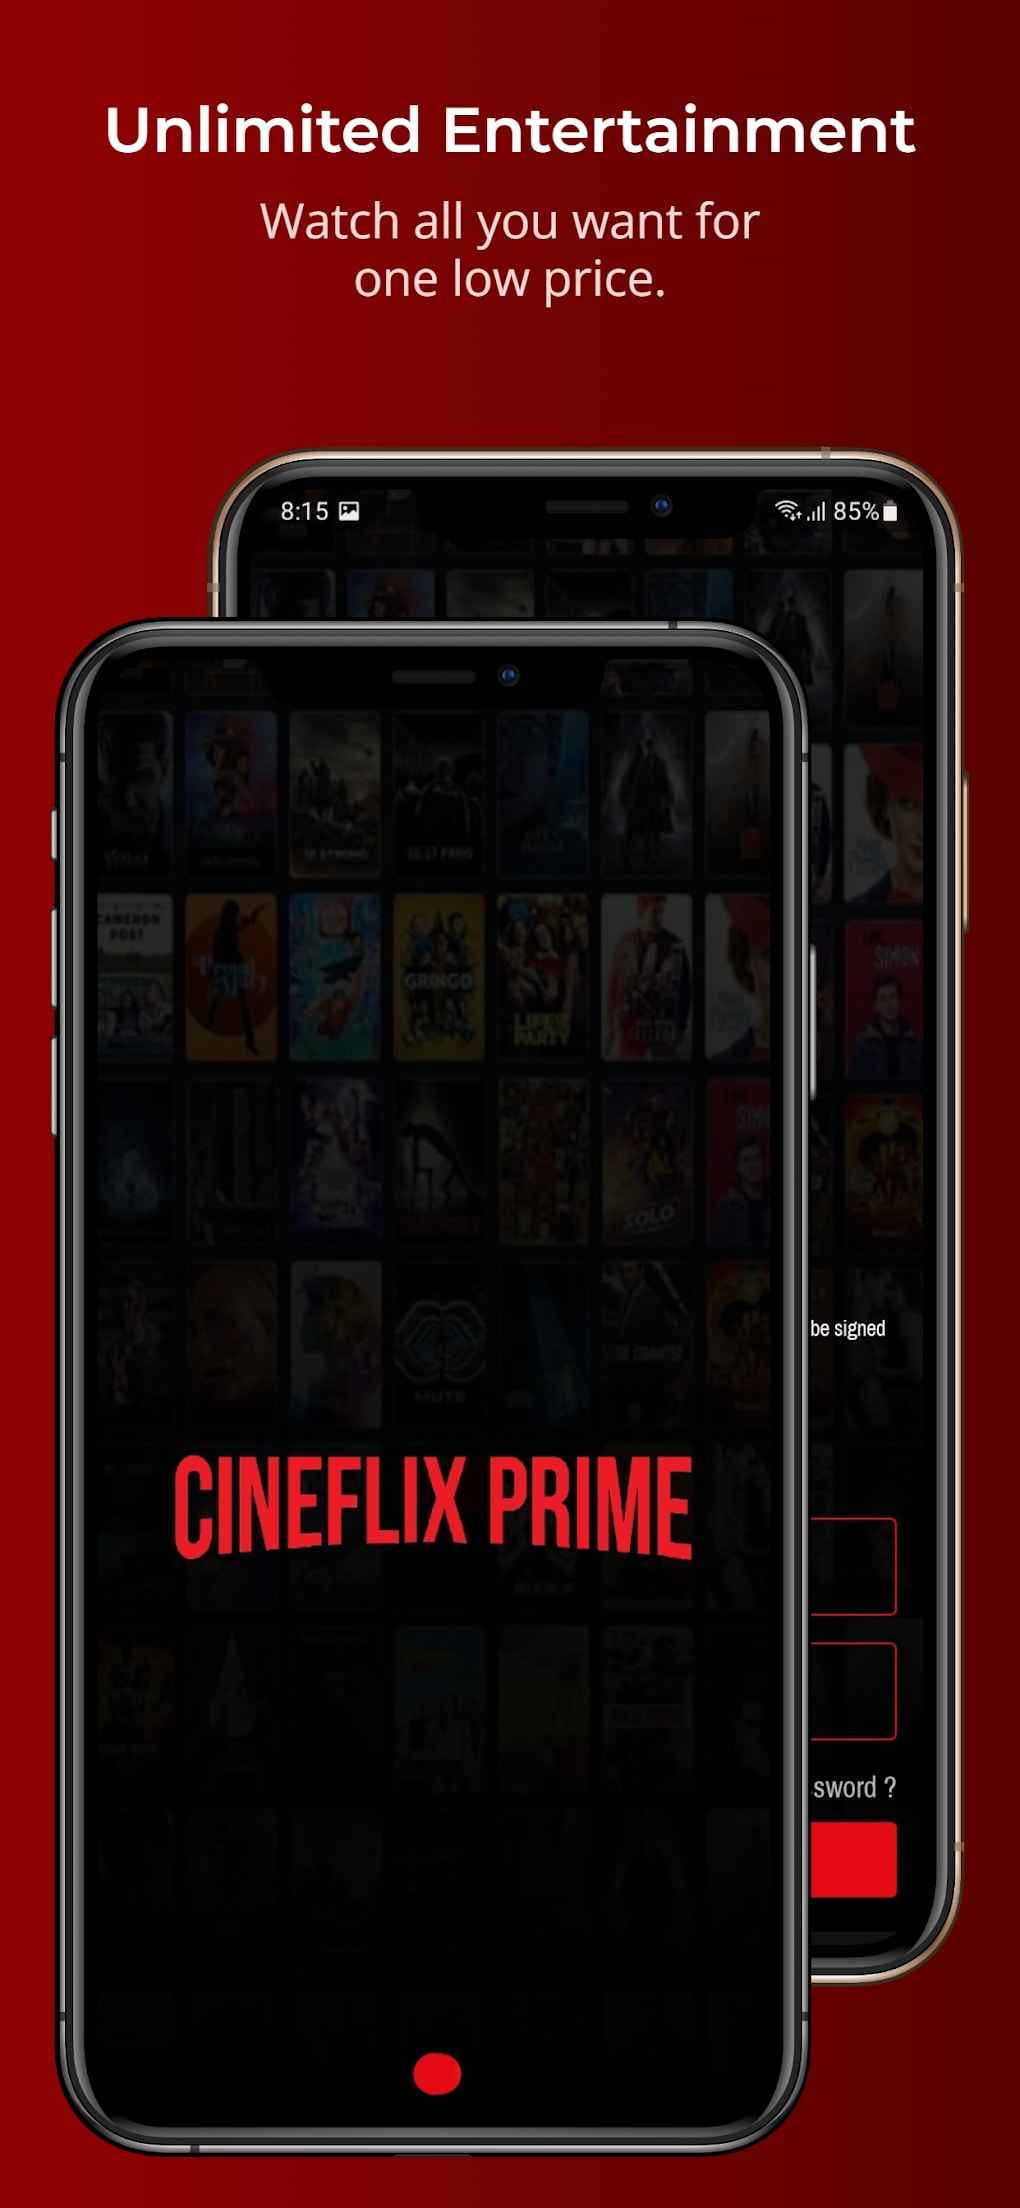 Android Apps by Cineflix Prime, Inc. on Google Play